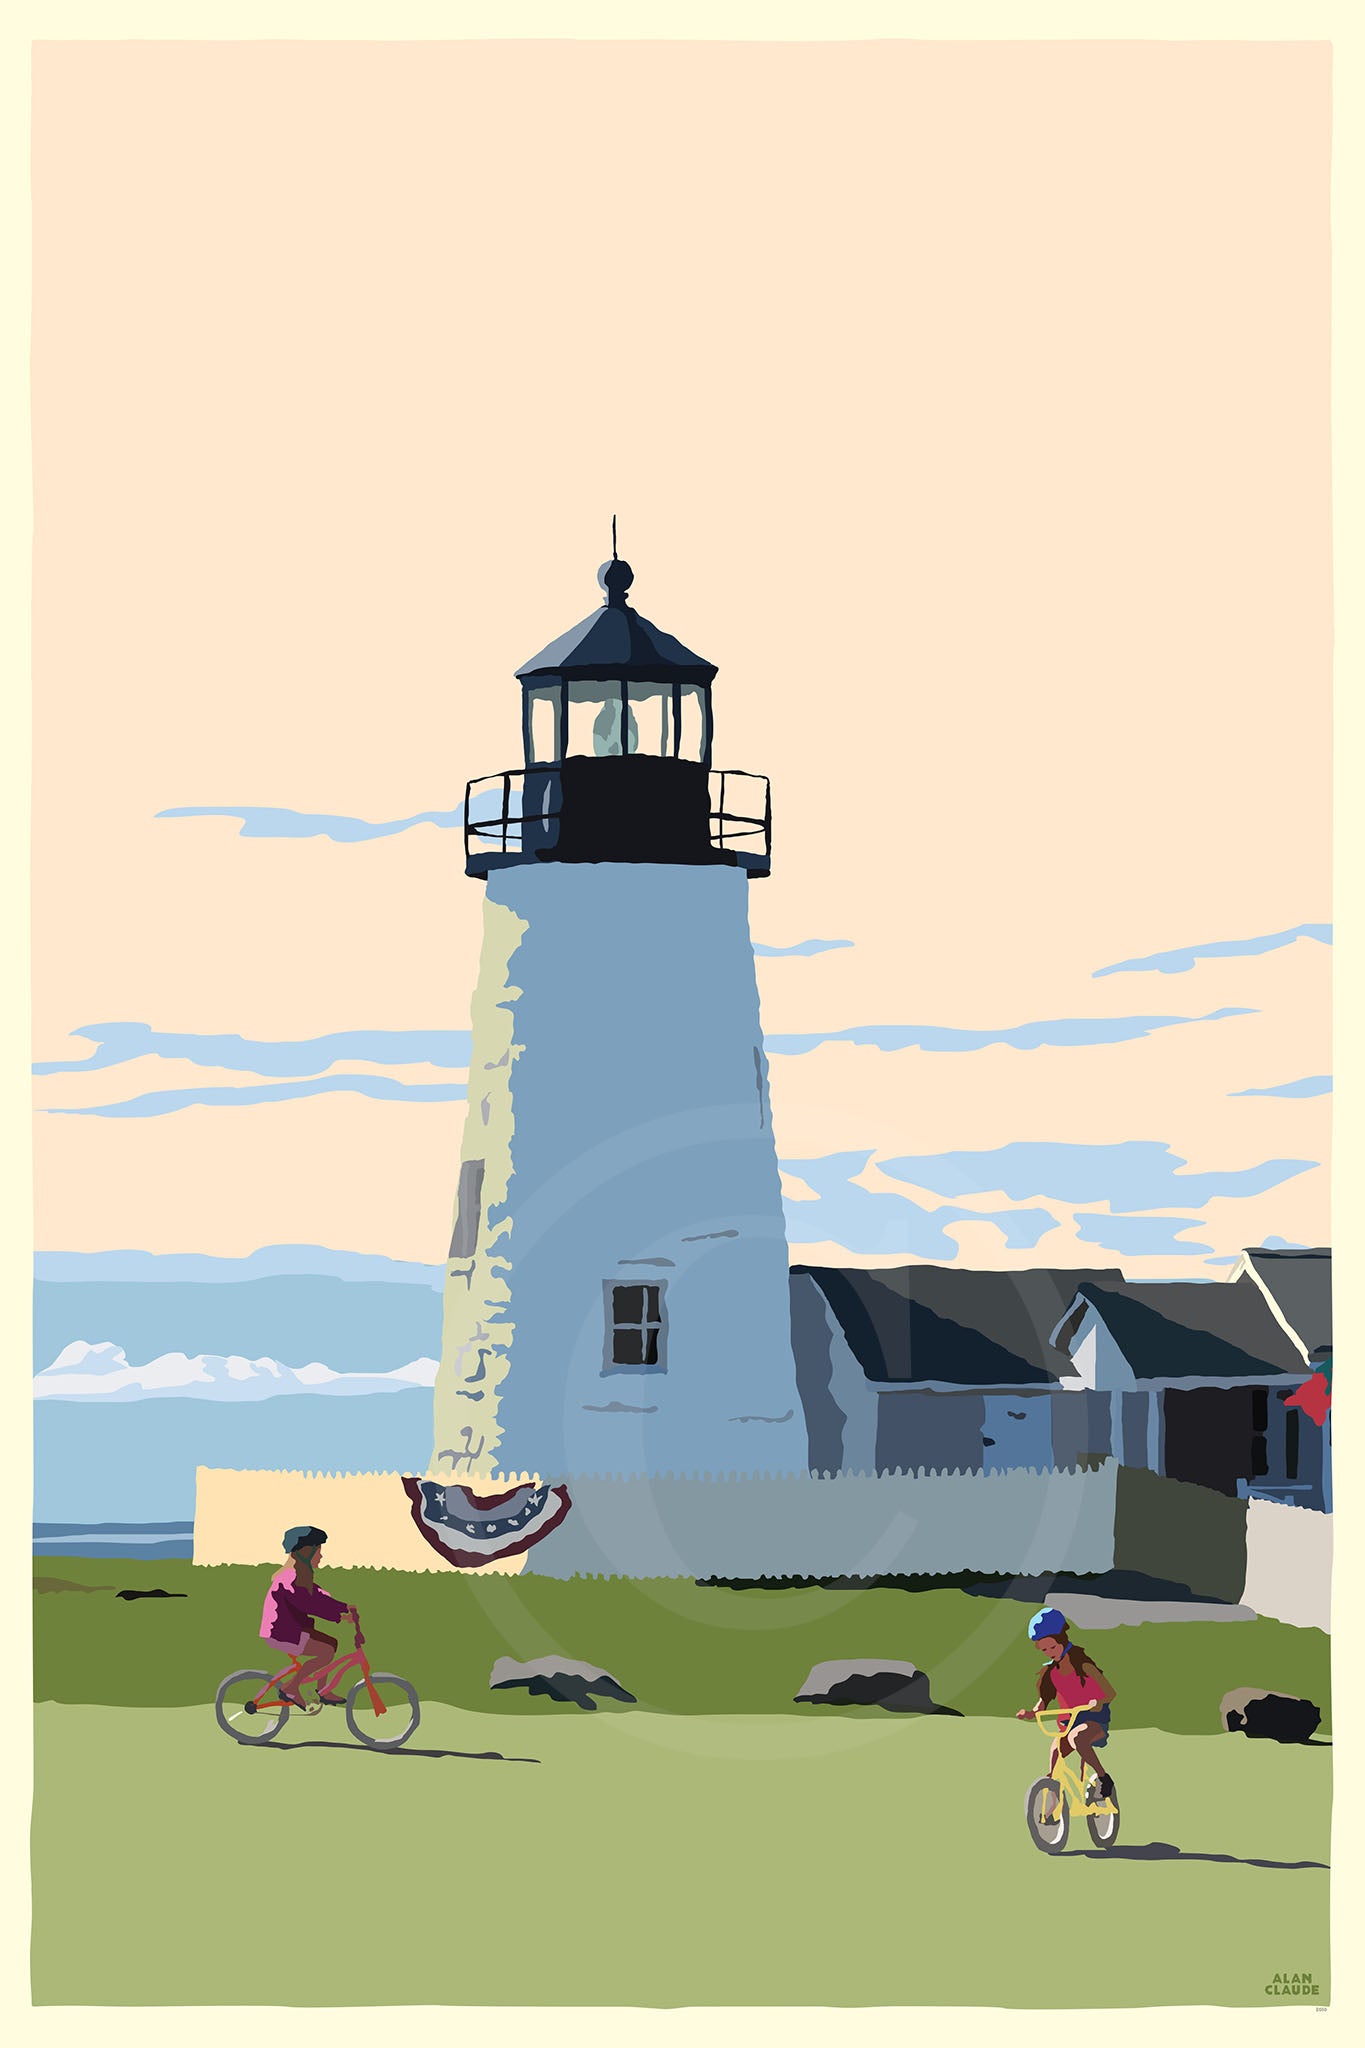 Pemaquid Bicycle Girls Art Print 36" x 53" Travel Poster By Alan Claude - Maine